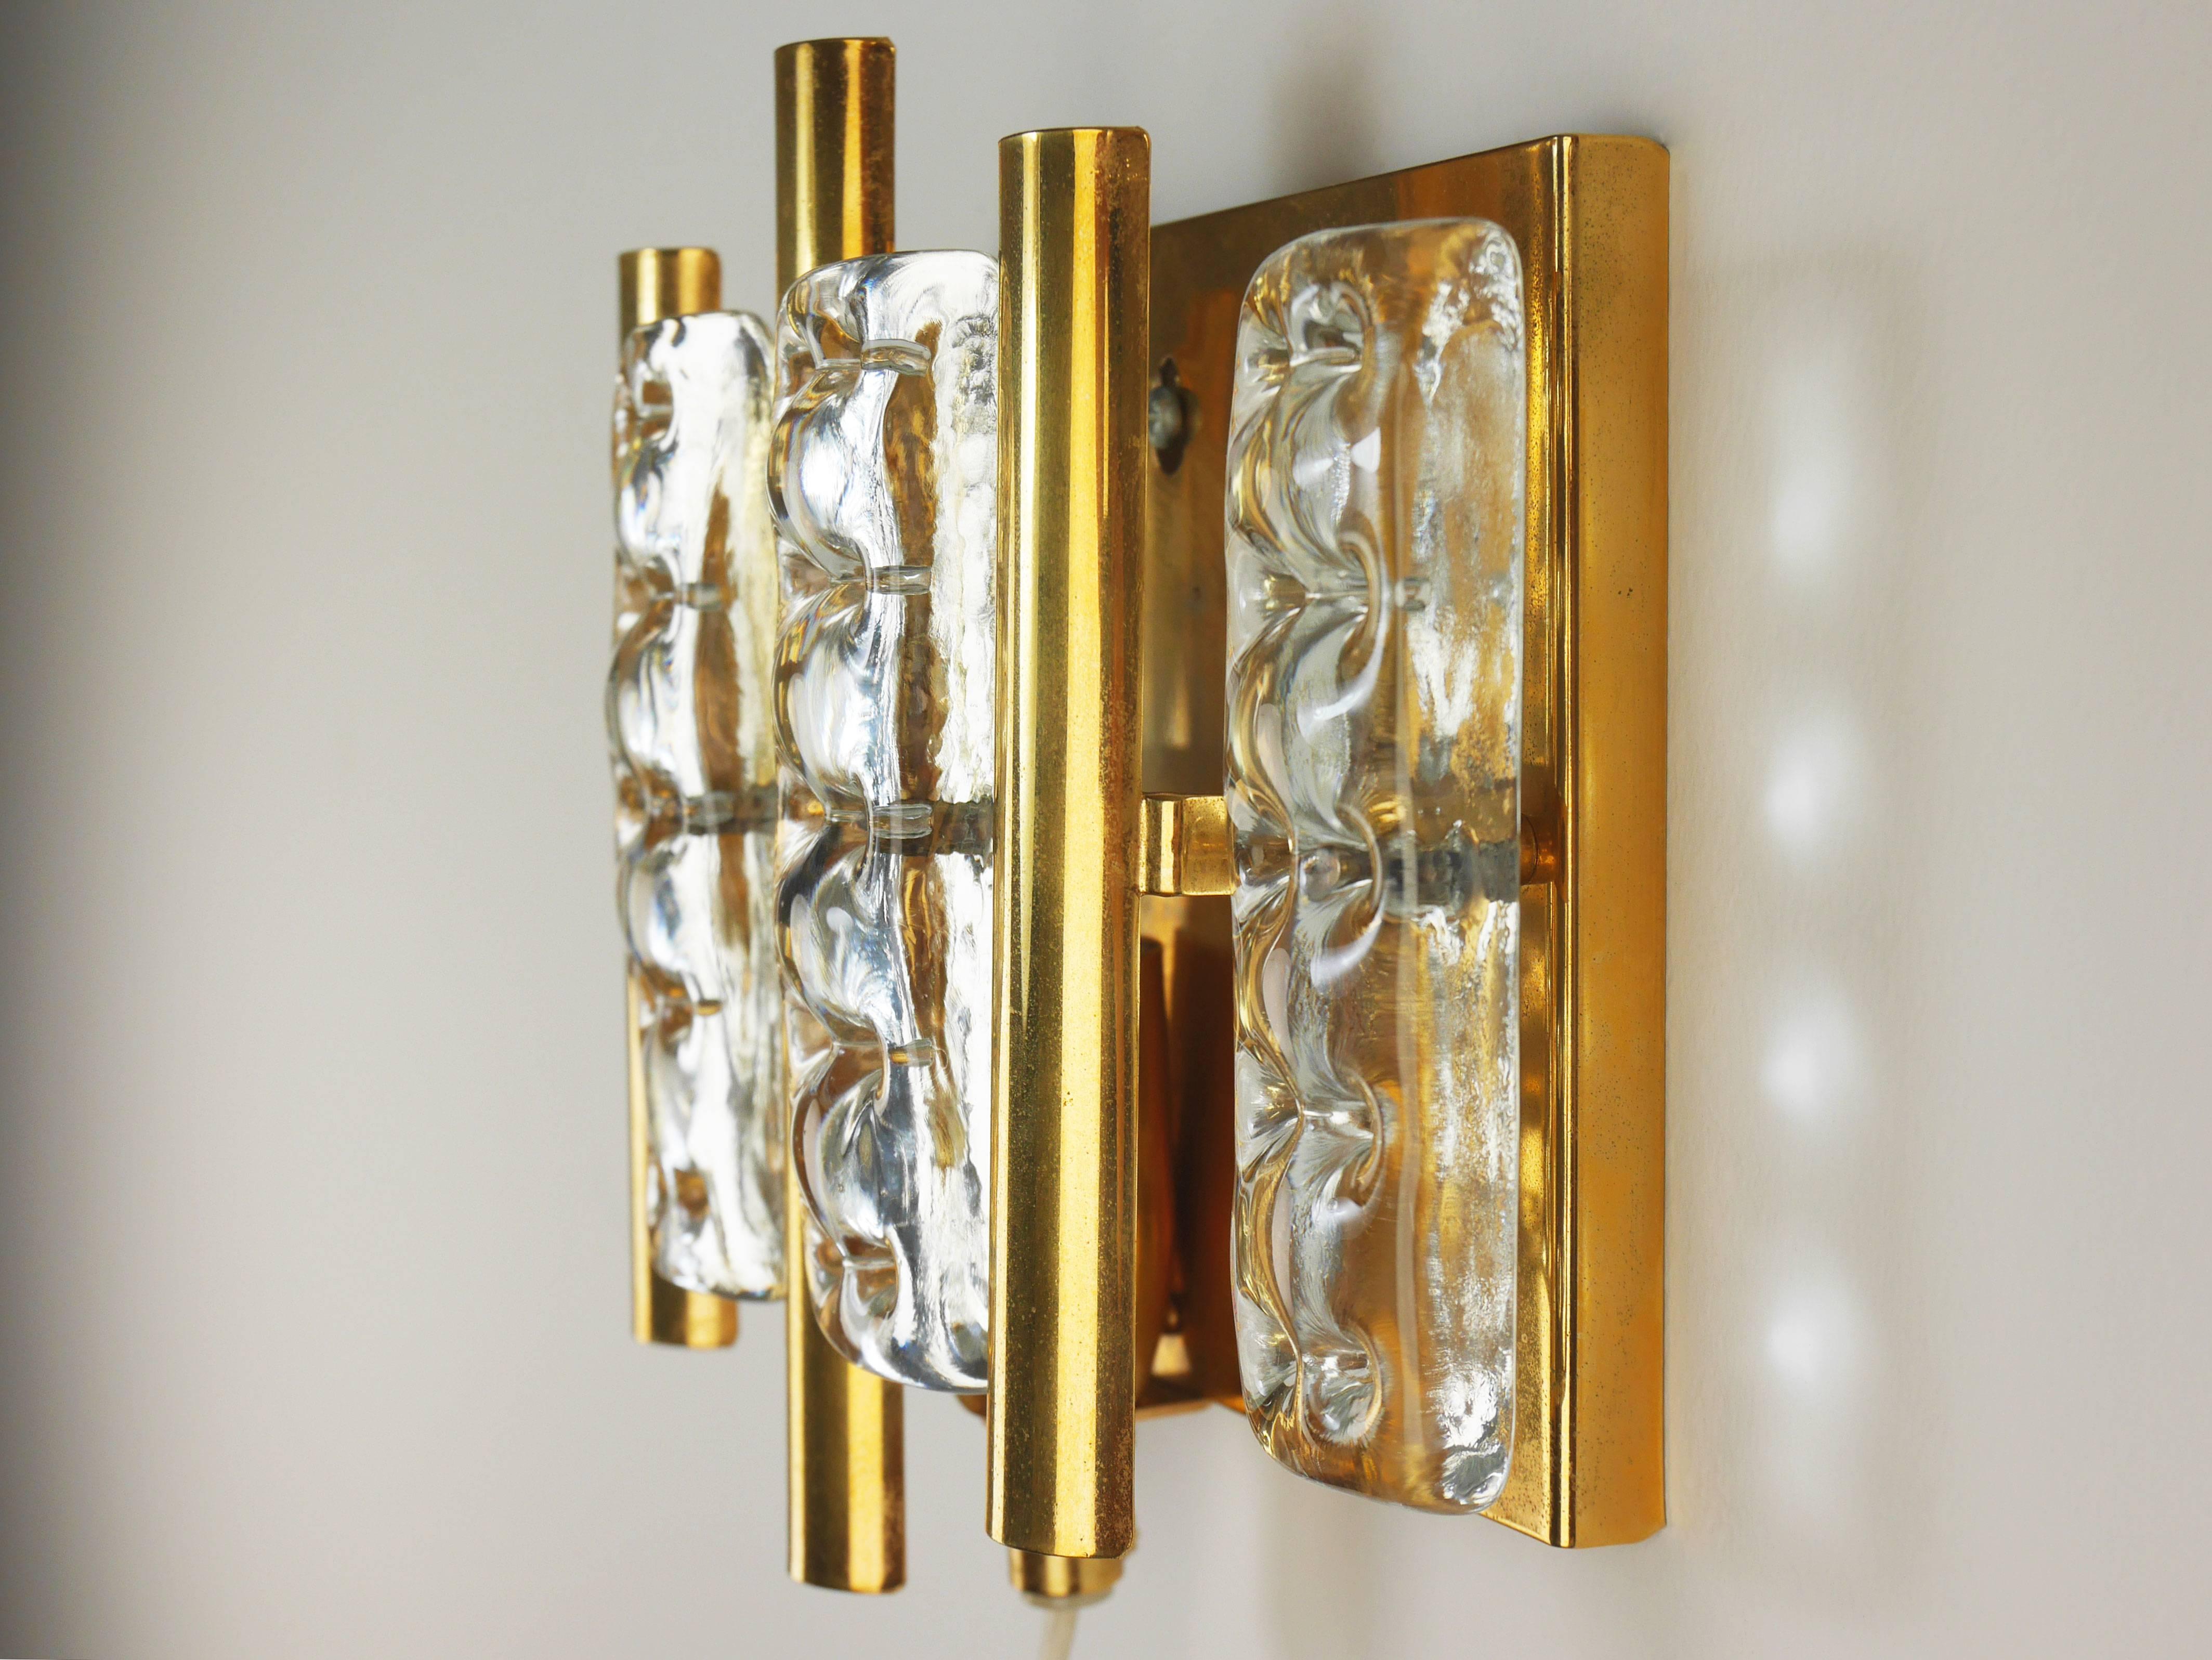 Hand-Crafted Hans-Agne Jakobsson for Orrefors Art Glass Brass Wall Light, Sweden, 1970s For Sale